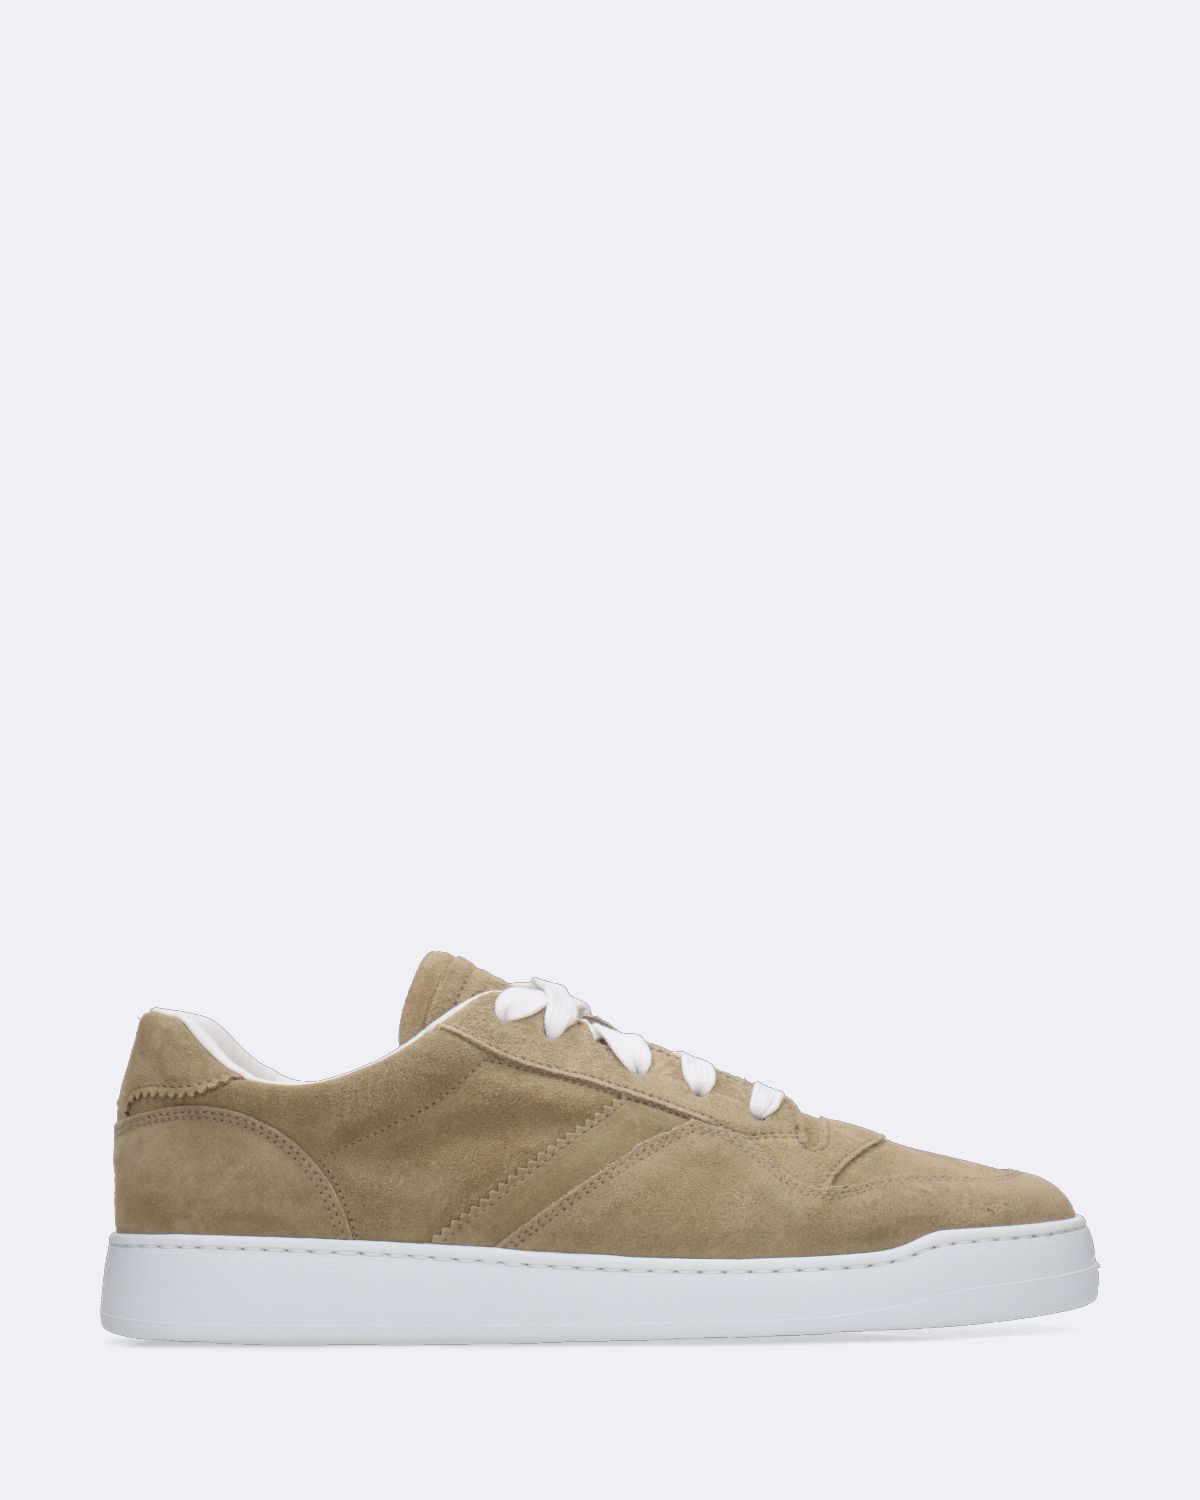 Sneakers in suede washed sabbia fondo cassetta